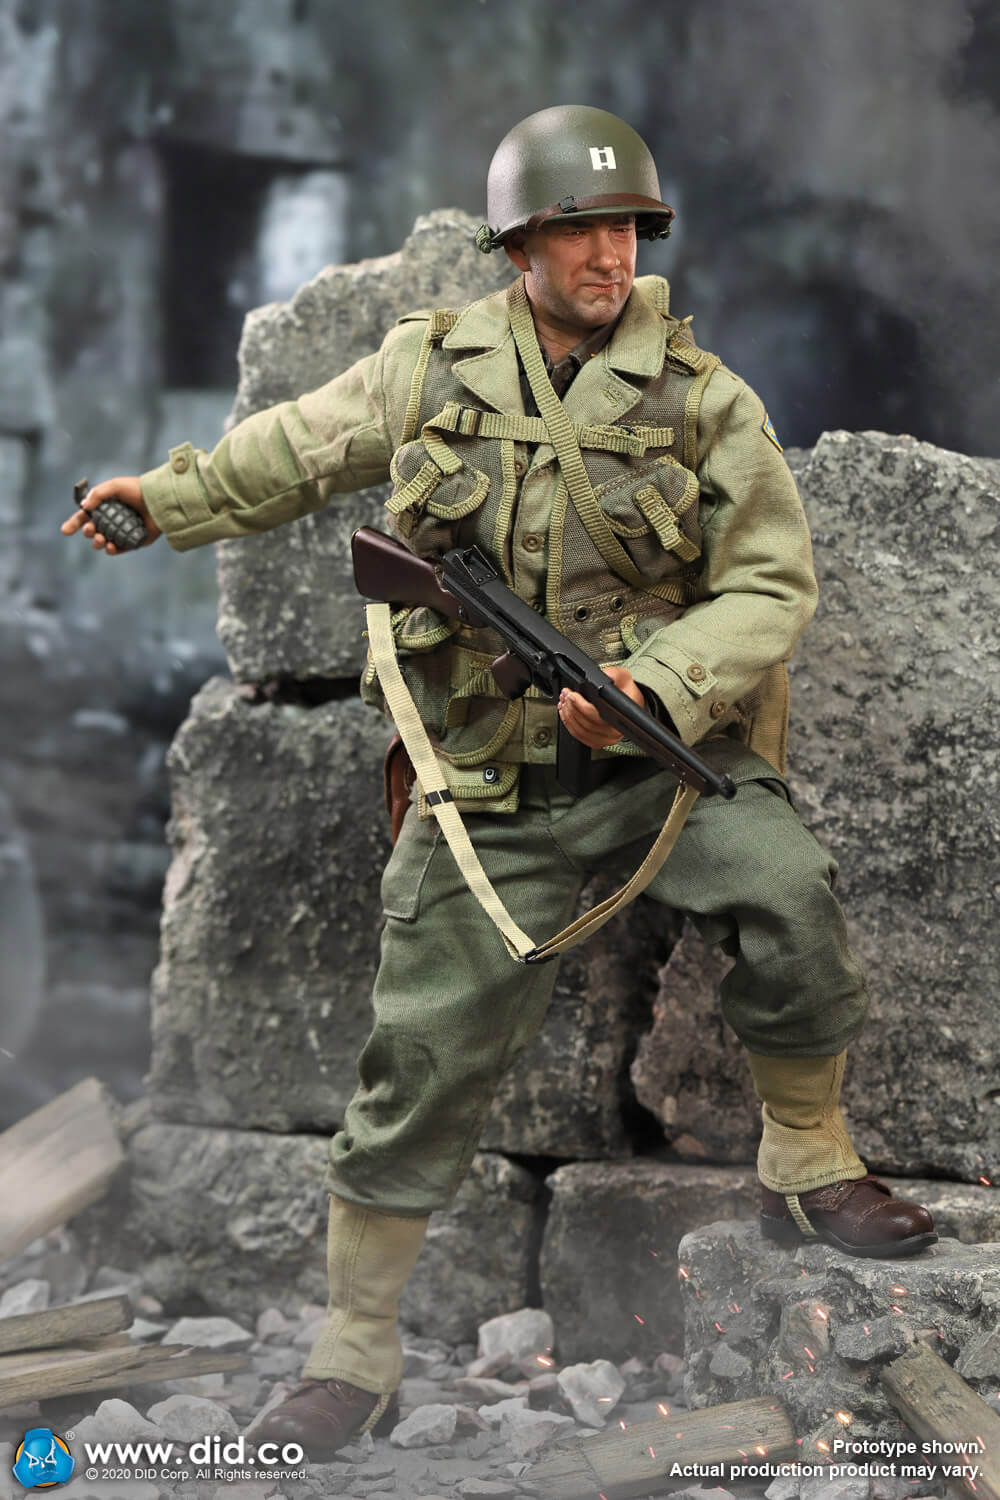 US2ndRangerBattalion - NEW PRODUCT: DiD: A80145 1/6 scale WWII US 2nd Ranger Battalion Series 3 Captain Miller 16199